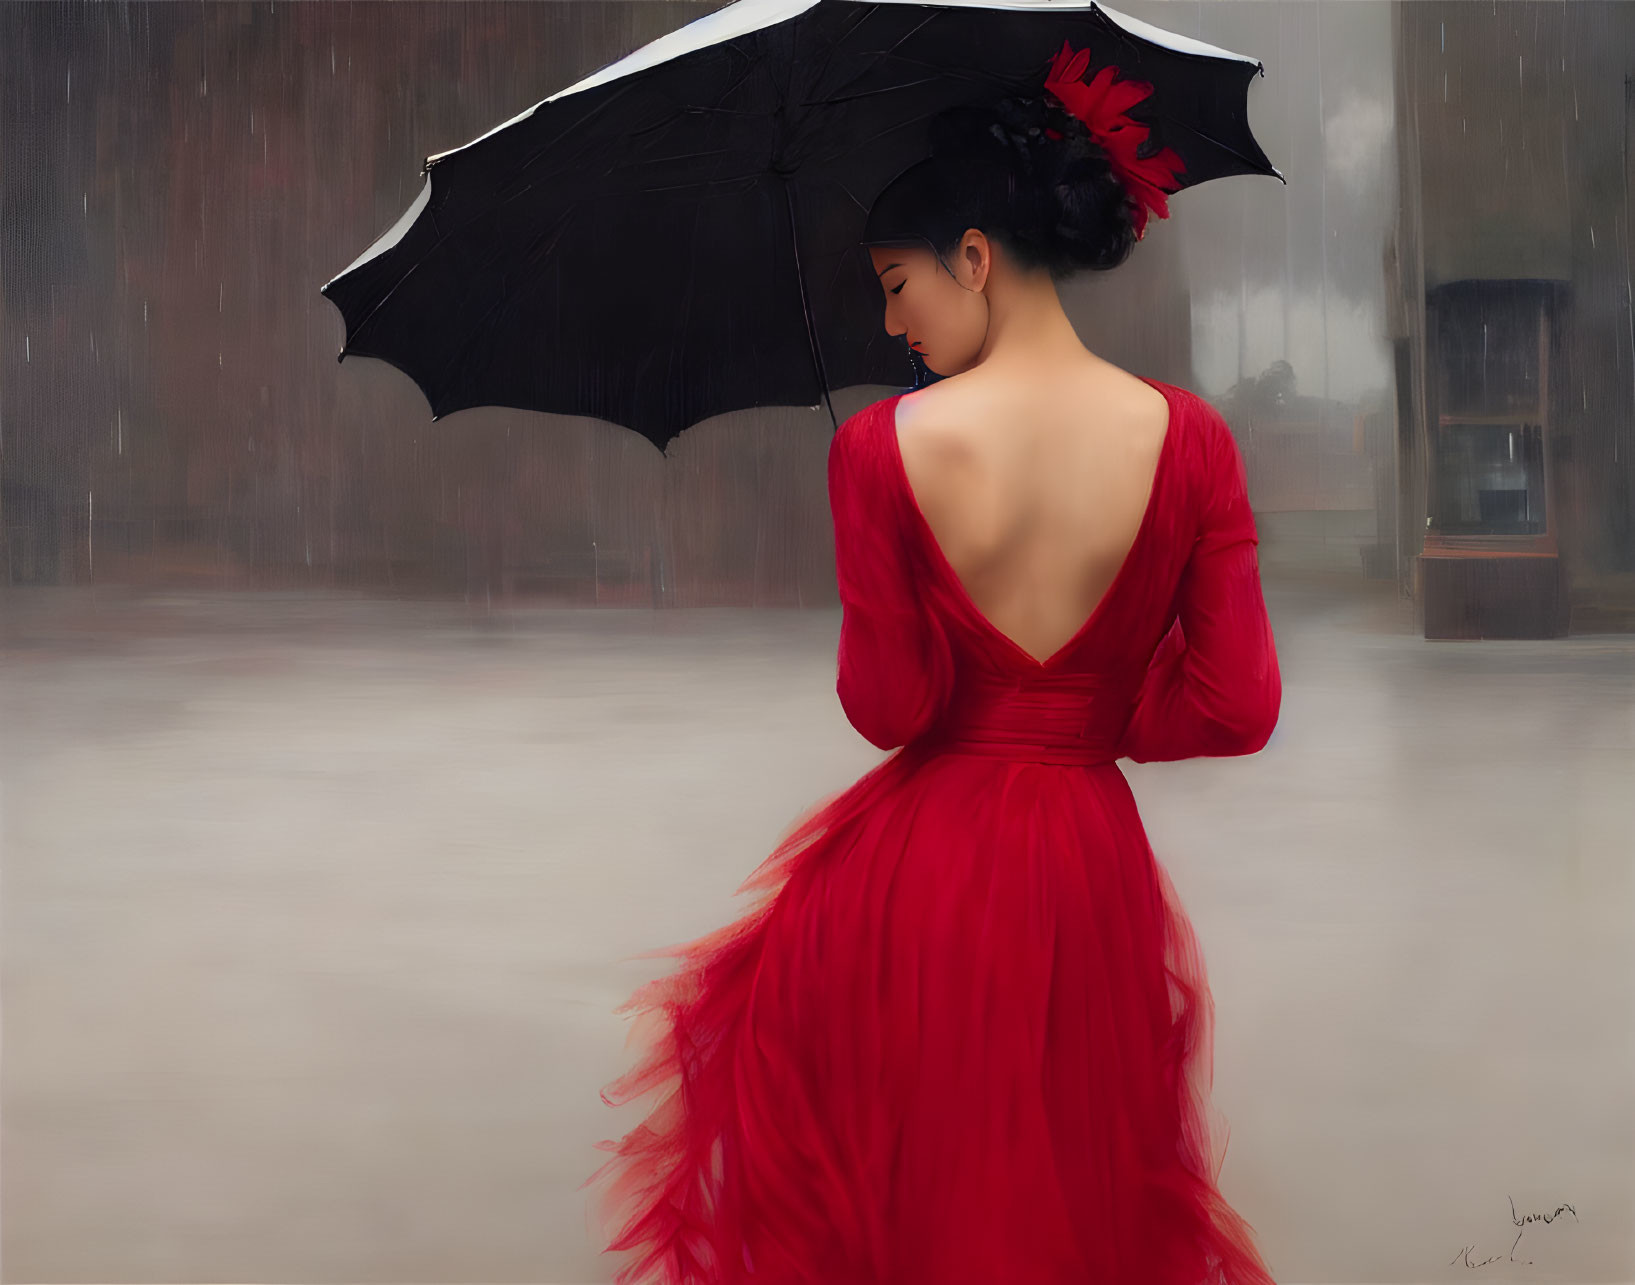 Woman in Red Dress with Black Umbrella in Rainy Scene